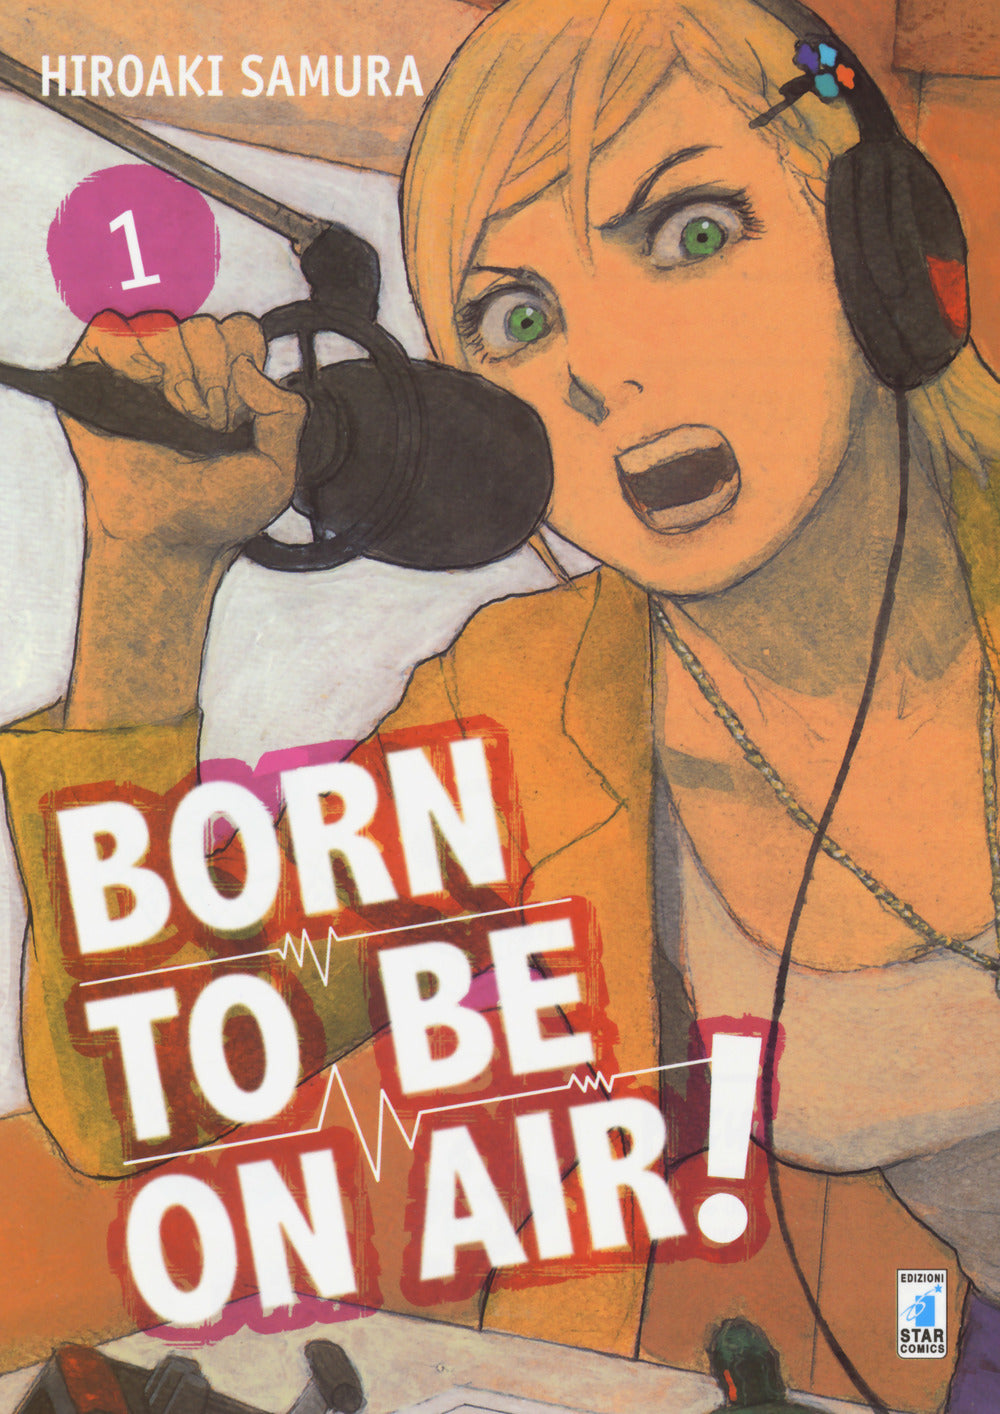 Born to be on air!. Vol. 1.